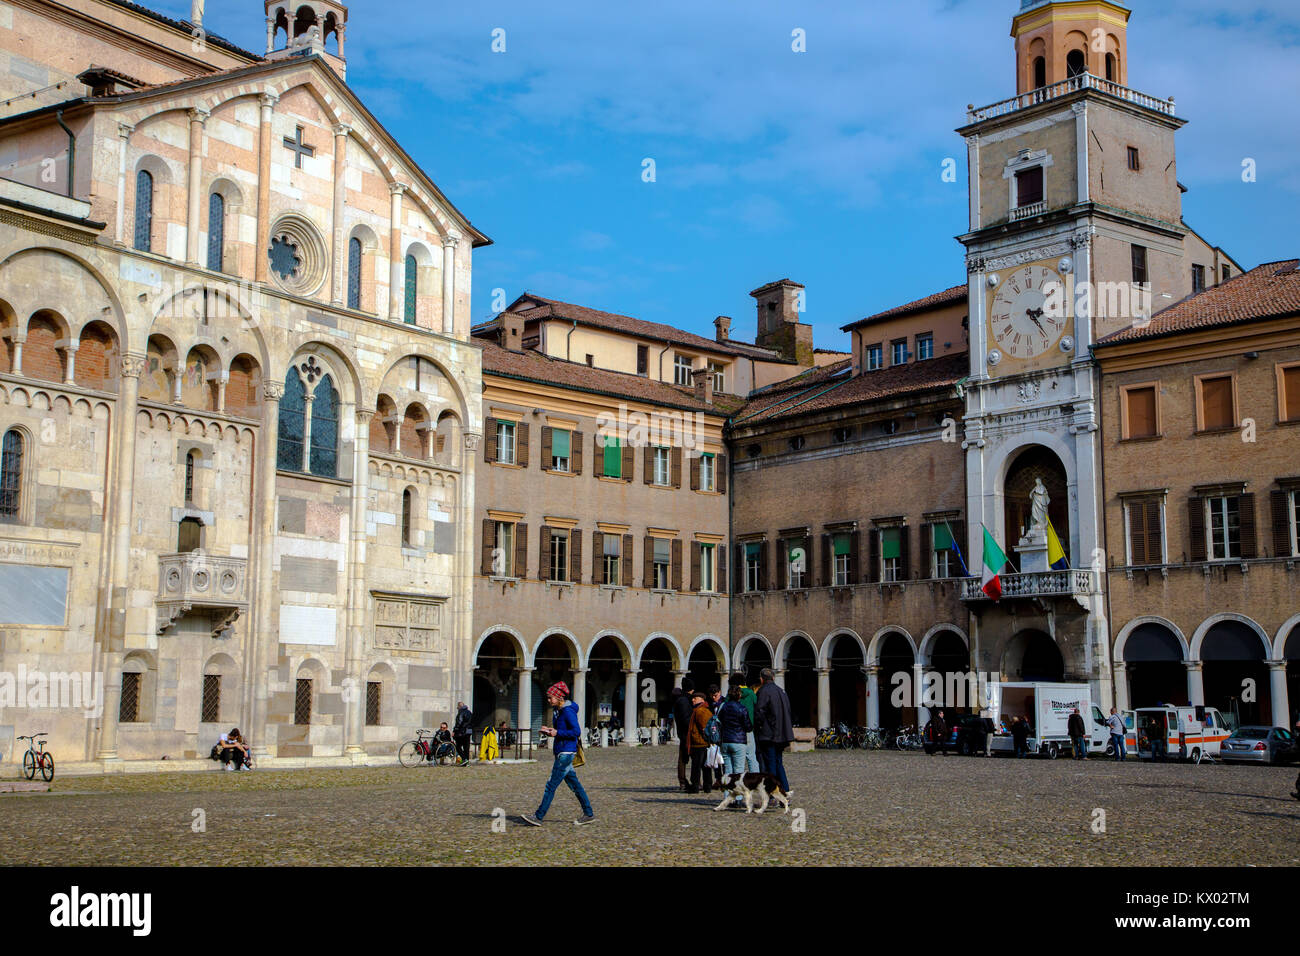 Piazza Grande looking towards the cathedral and town hall in Modena Italy Stock Photo